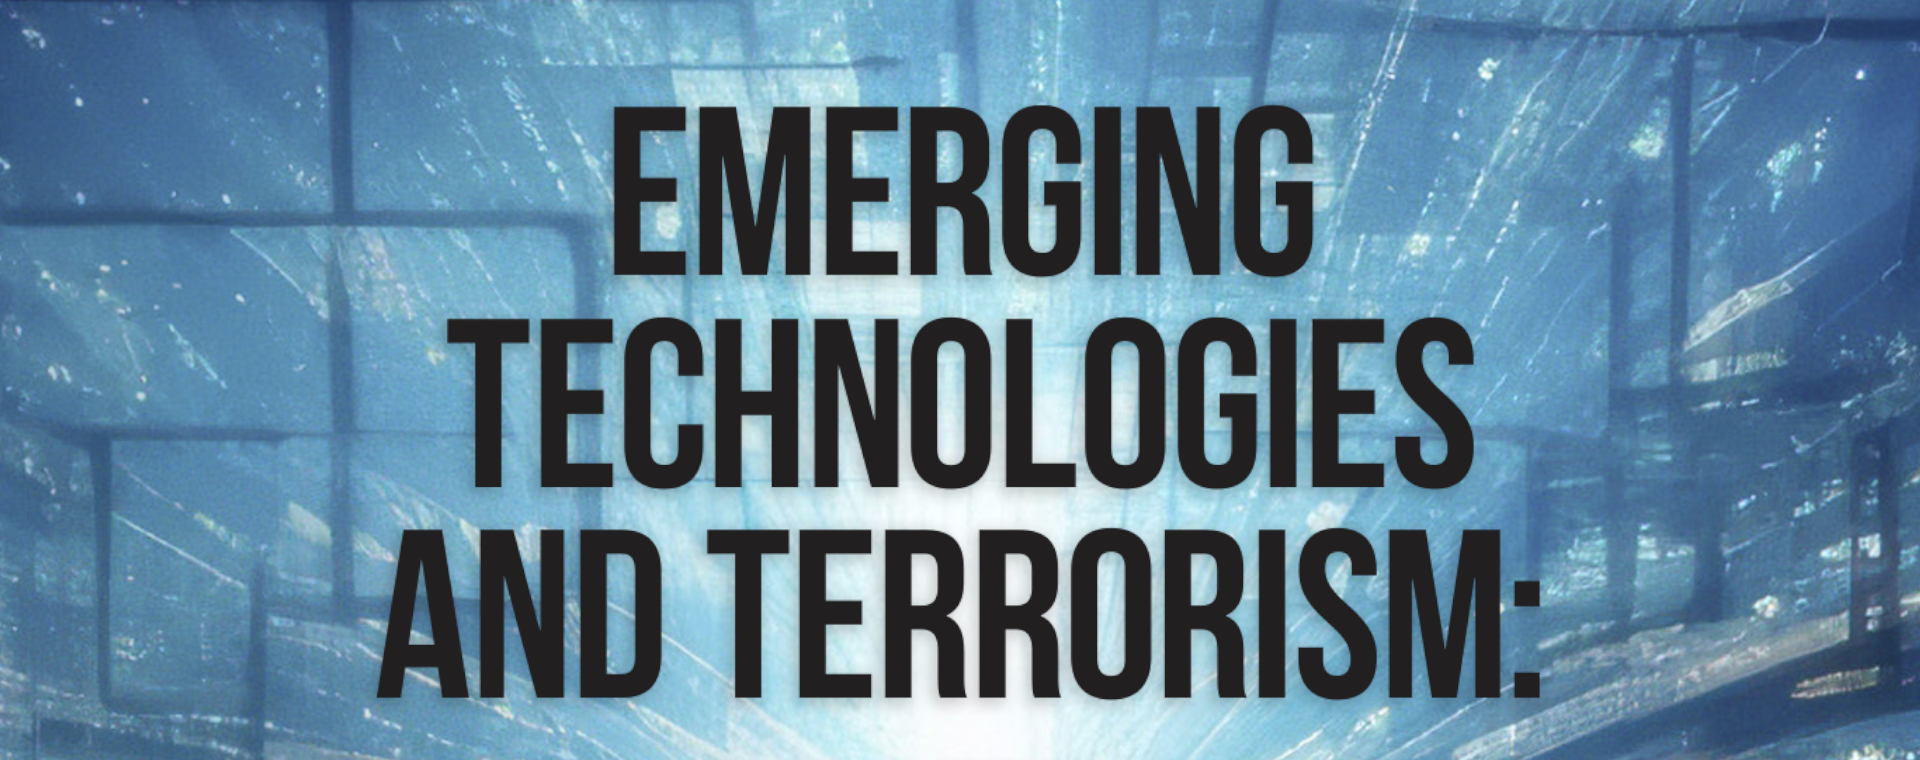 Emerging Technologies and Terrorism